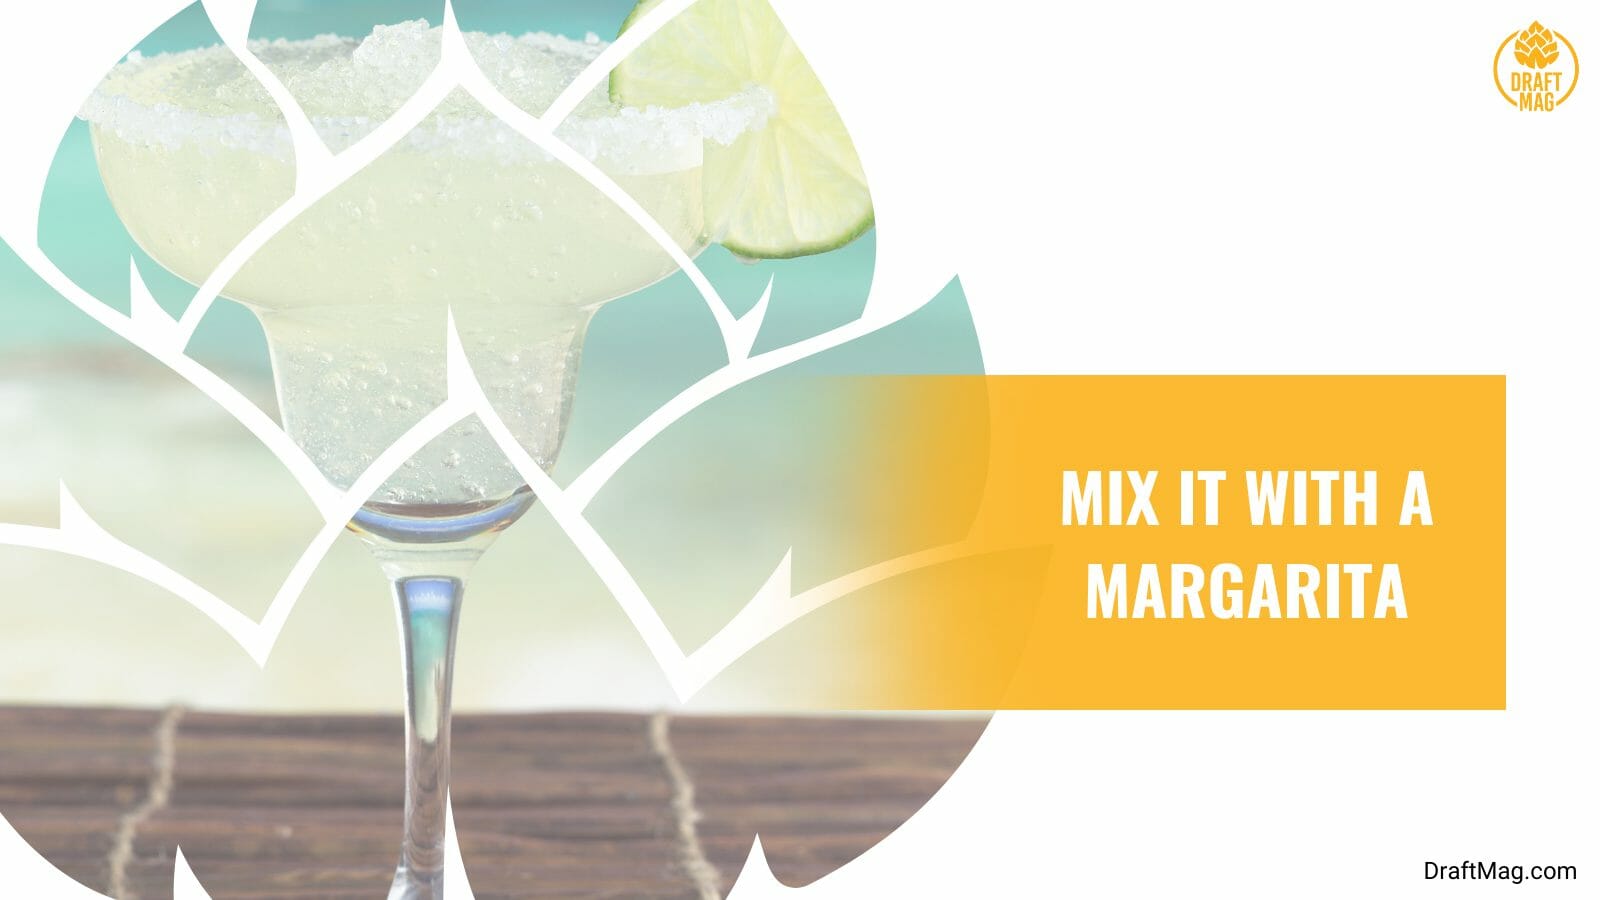 Mix it with a margarita